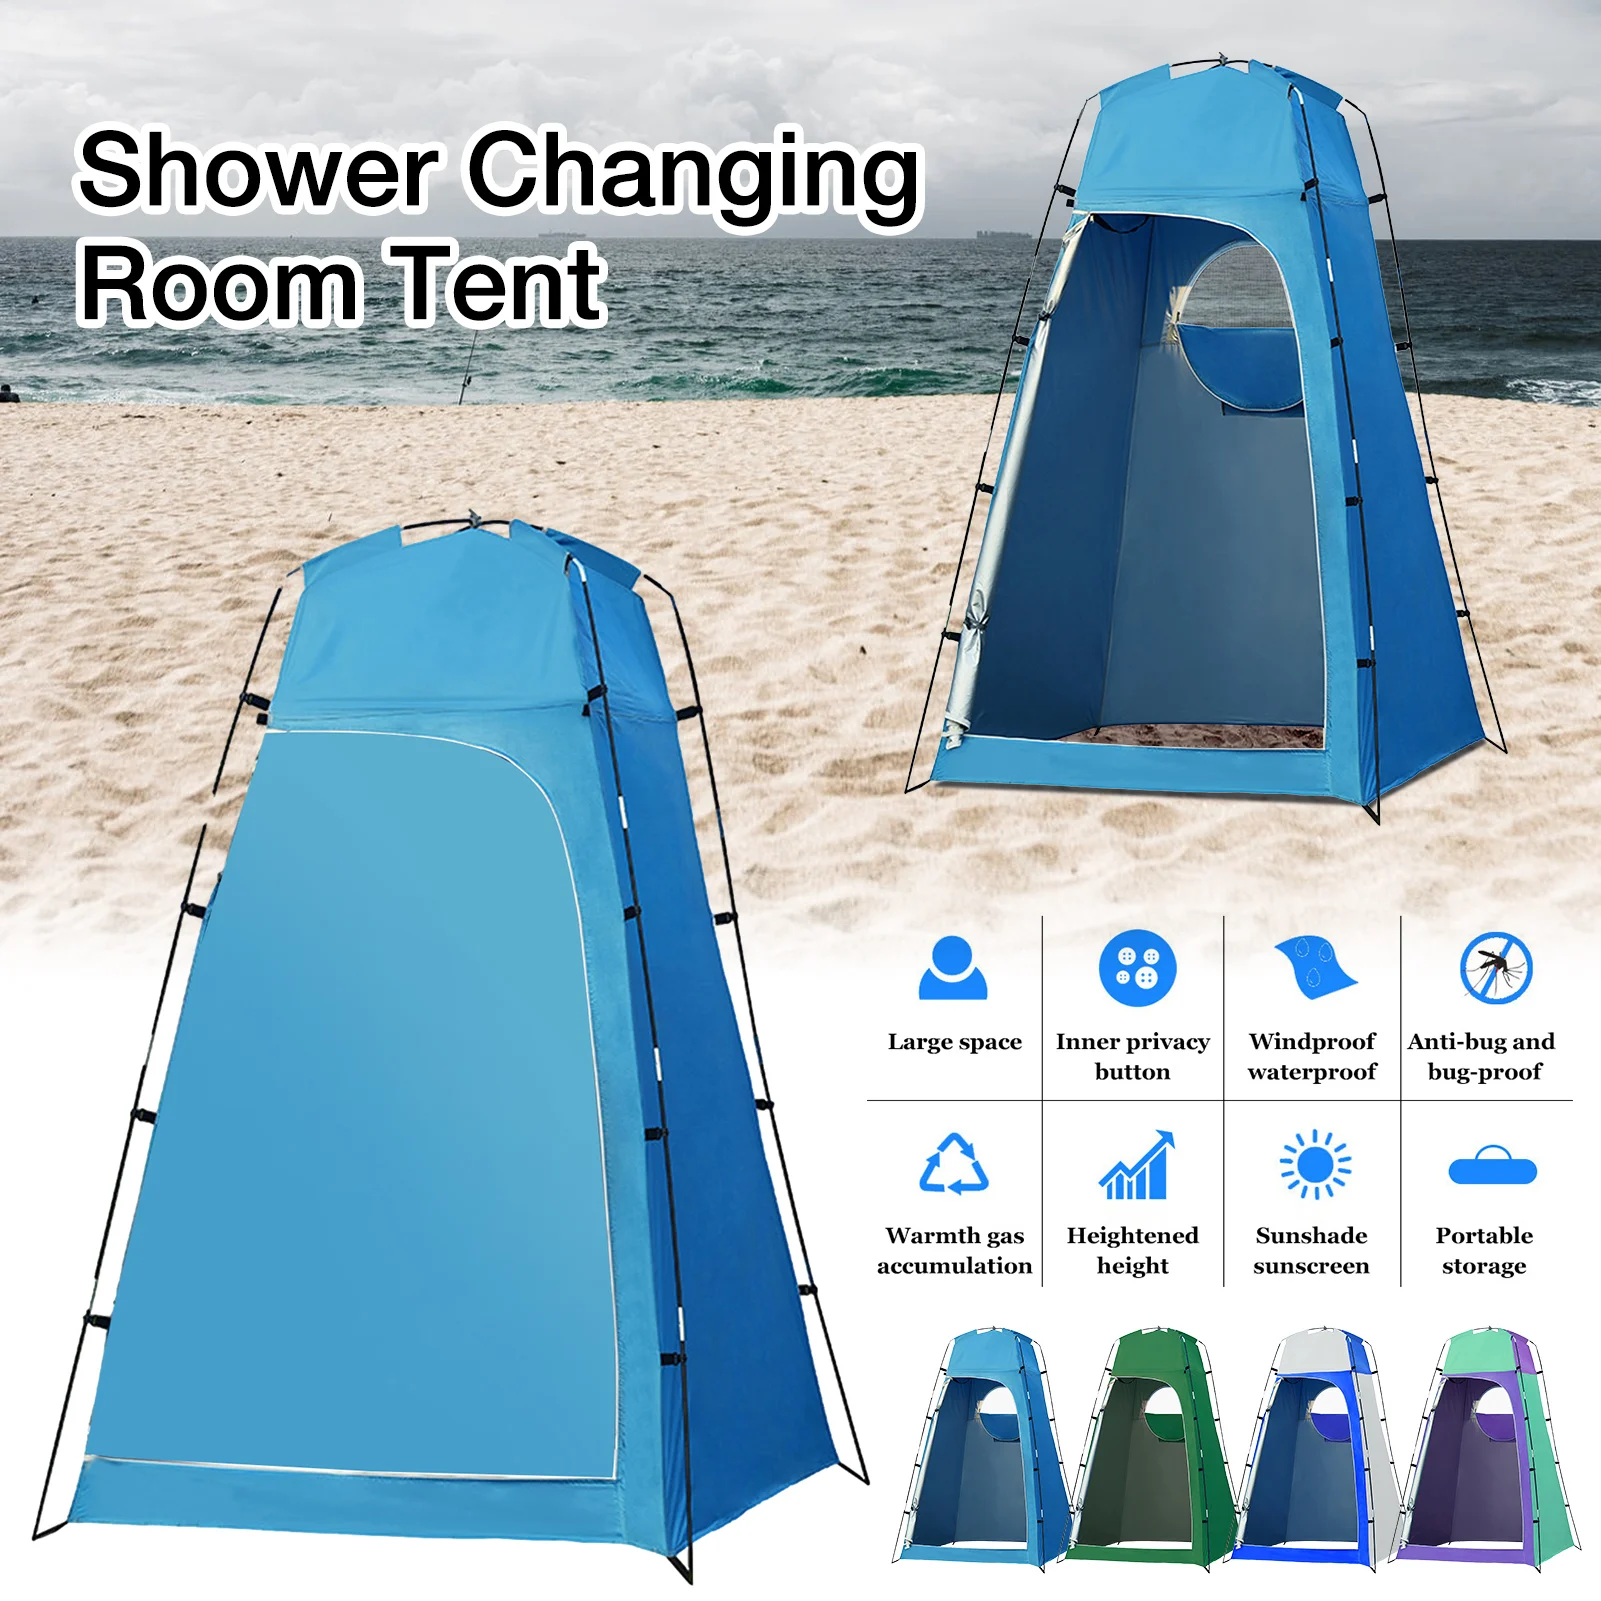 130*130*210cm Portable Privacy Tent Camping Shower Tent Changing Room Lightweight Anti-UV For Outdoors Hiking Camping Beach